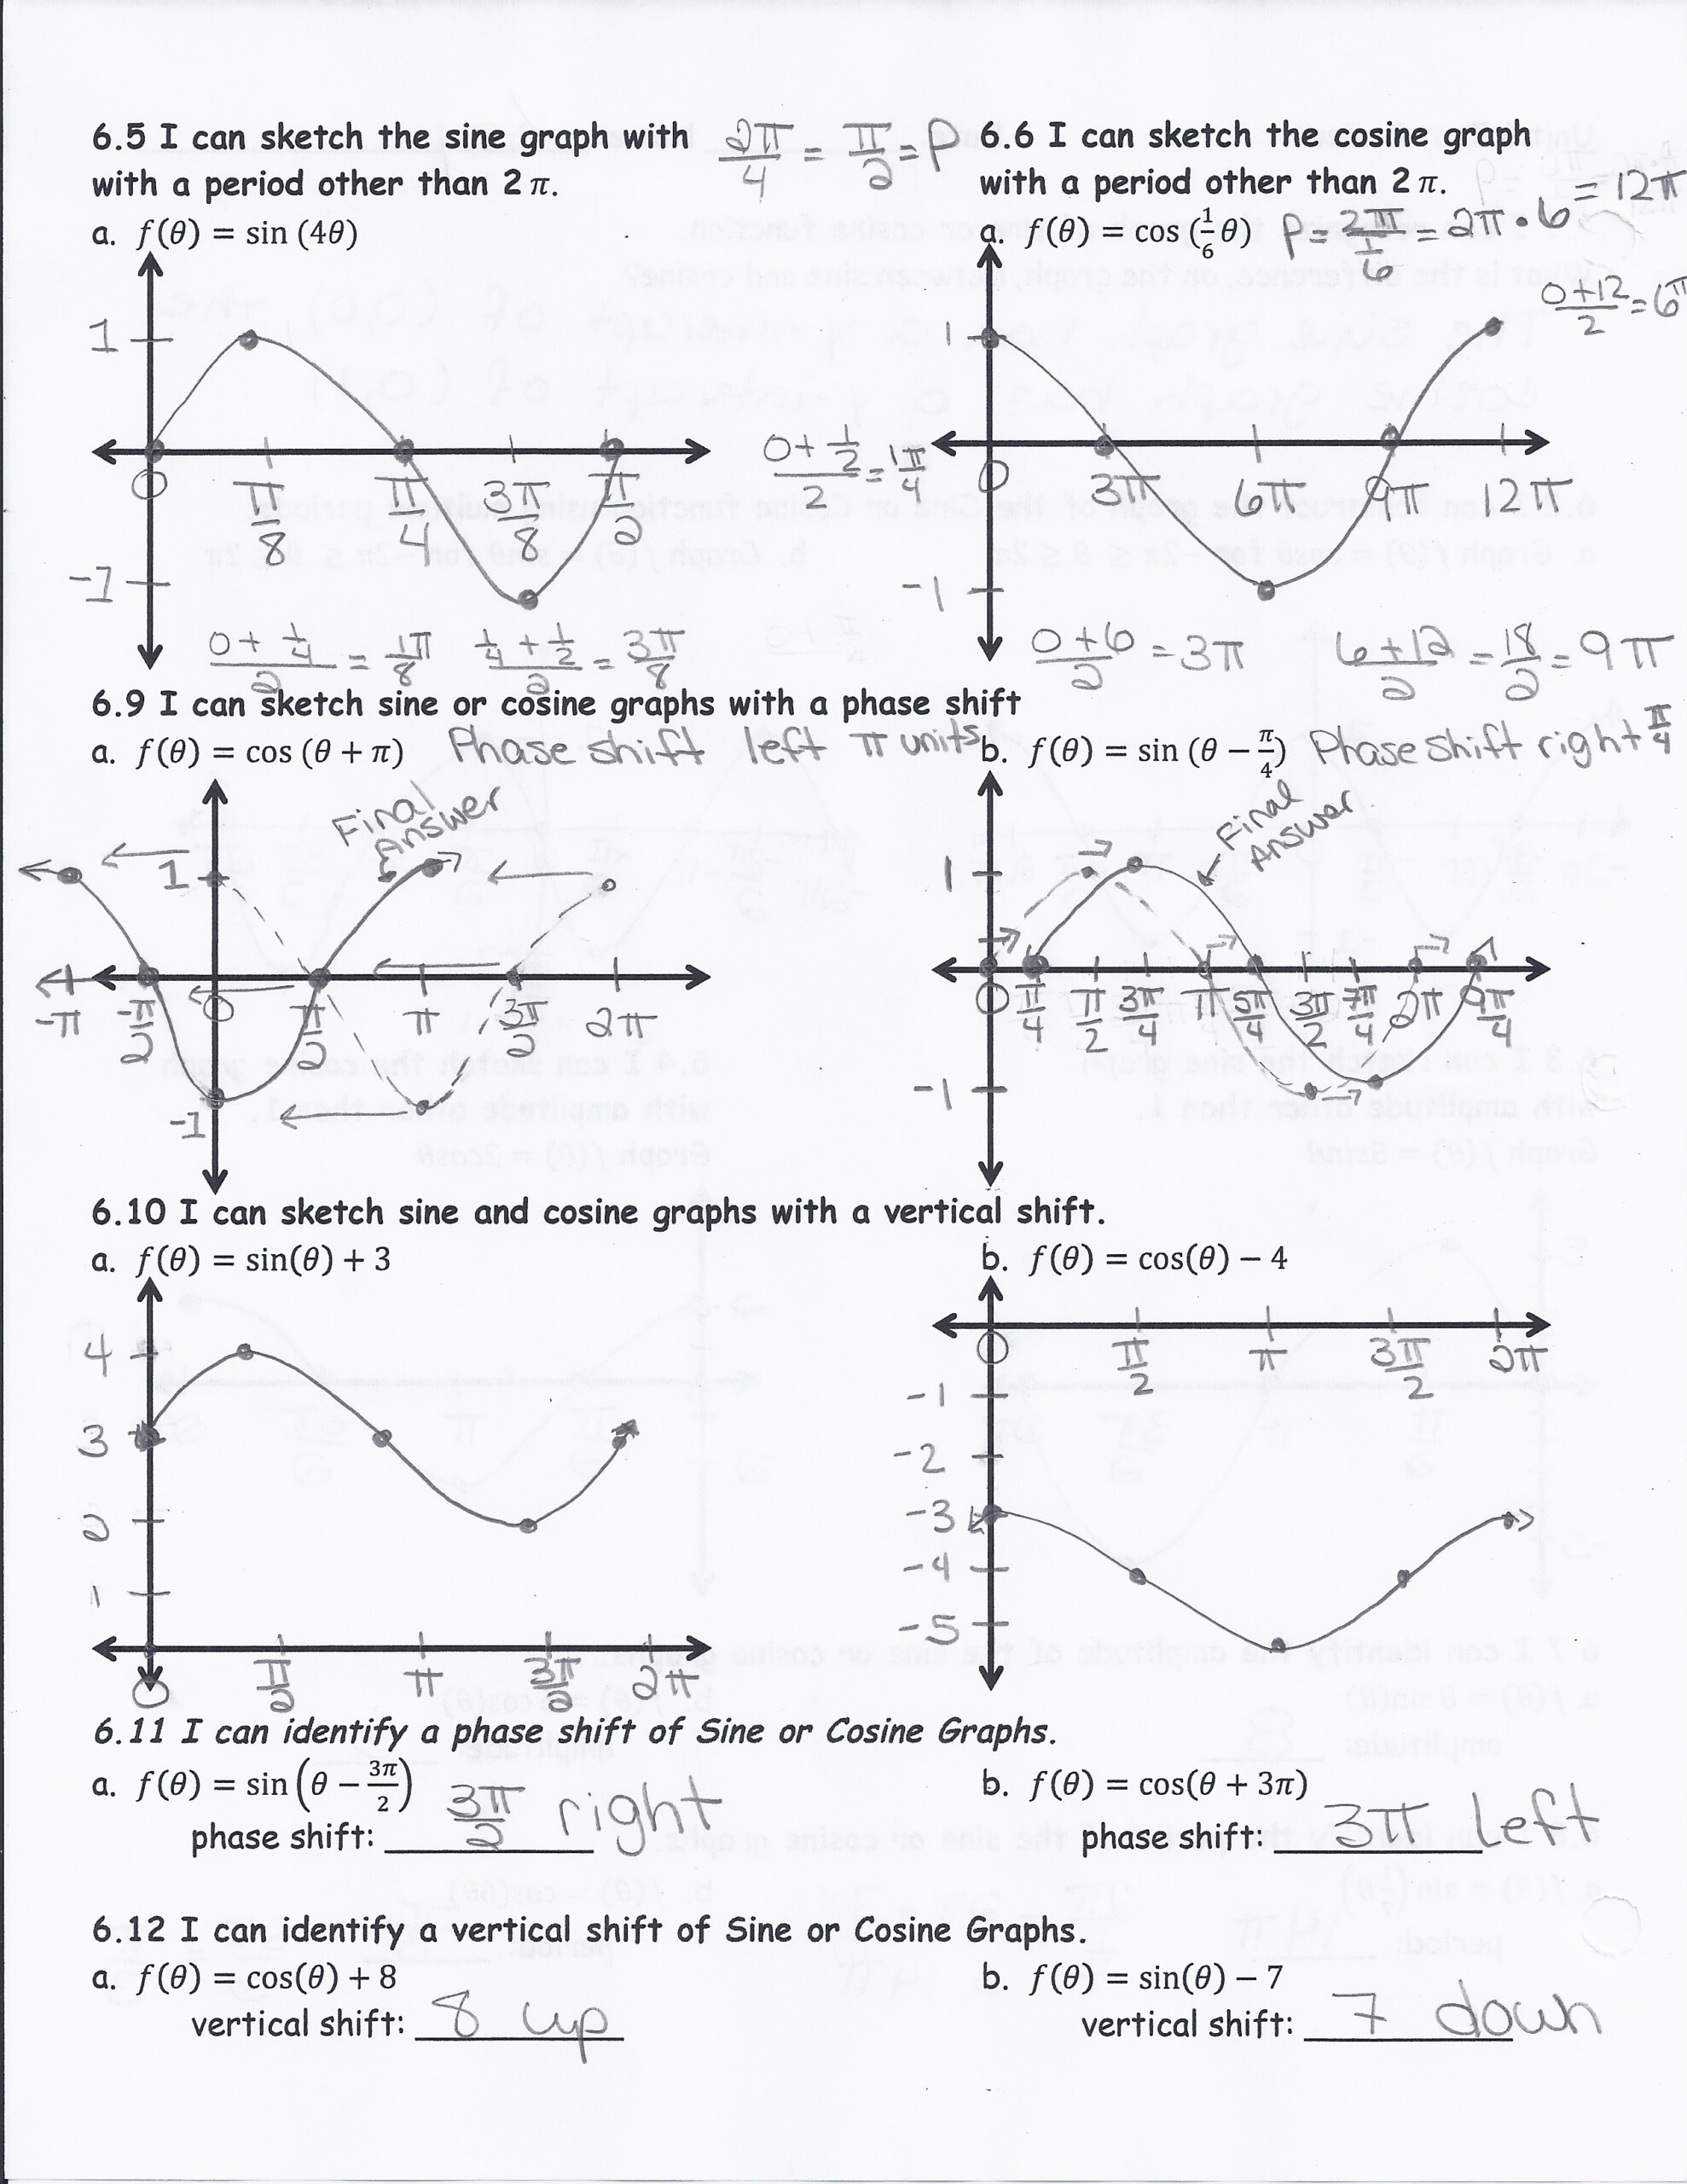 graphing-sine-and-cosine-functions-practice-worksheet-with-answers